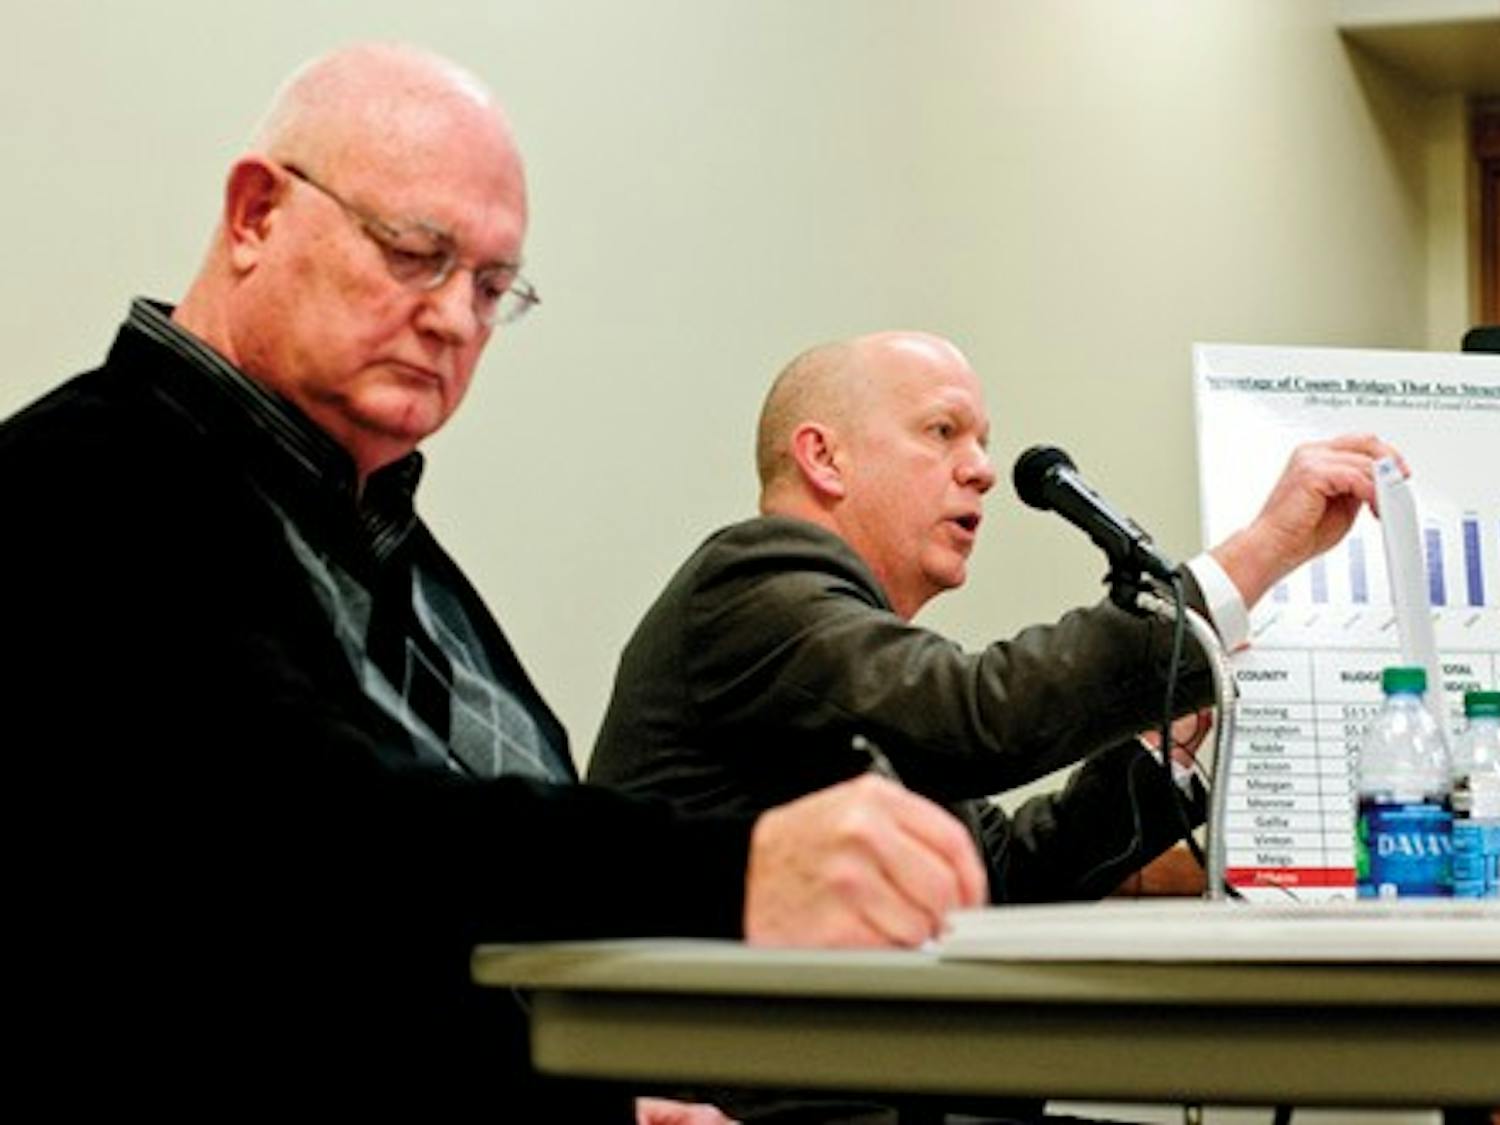 Athens County Engineer hopefuls share ideas in fiery forum  